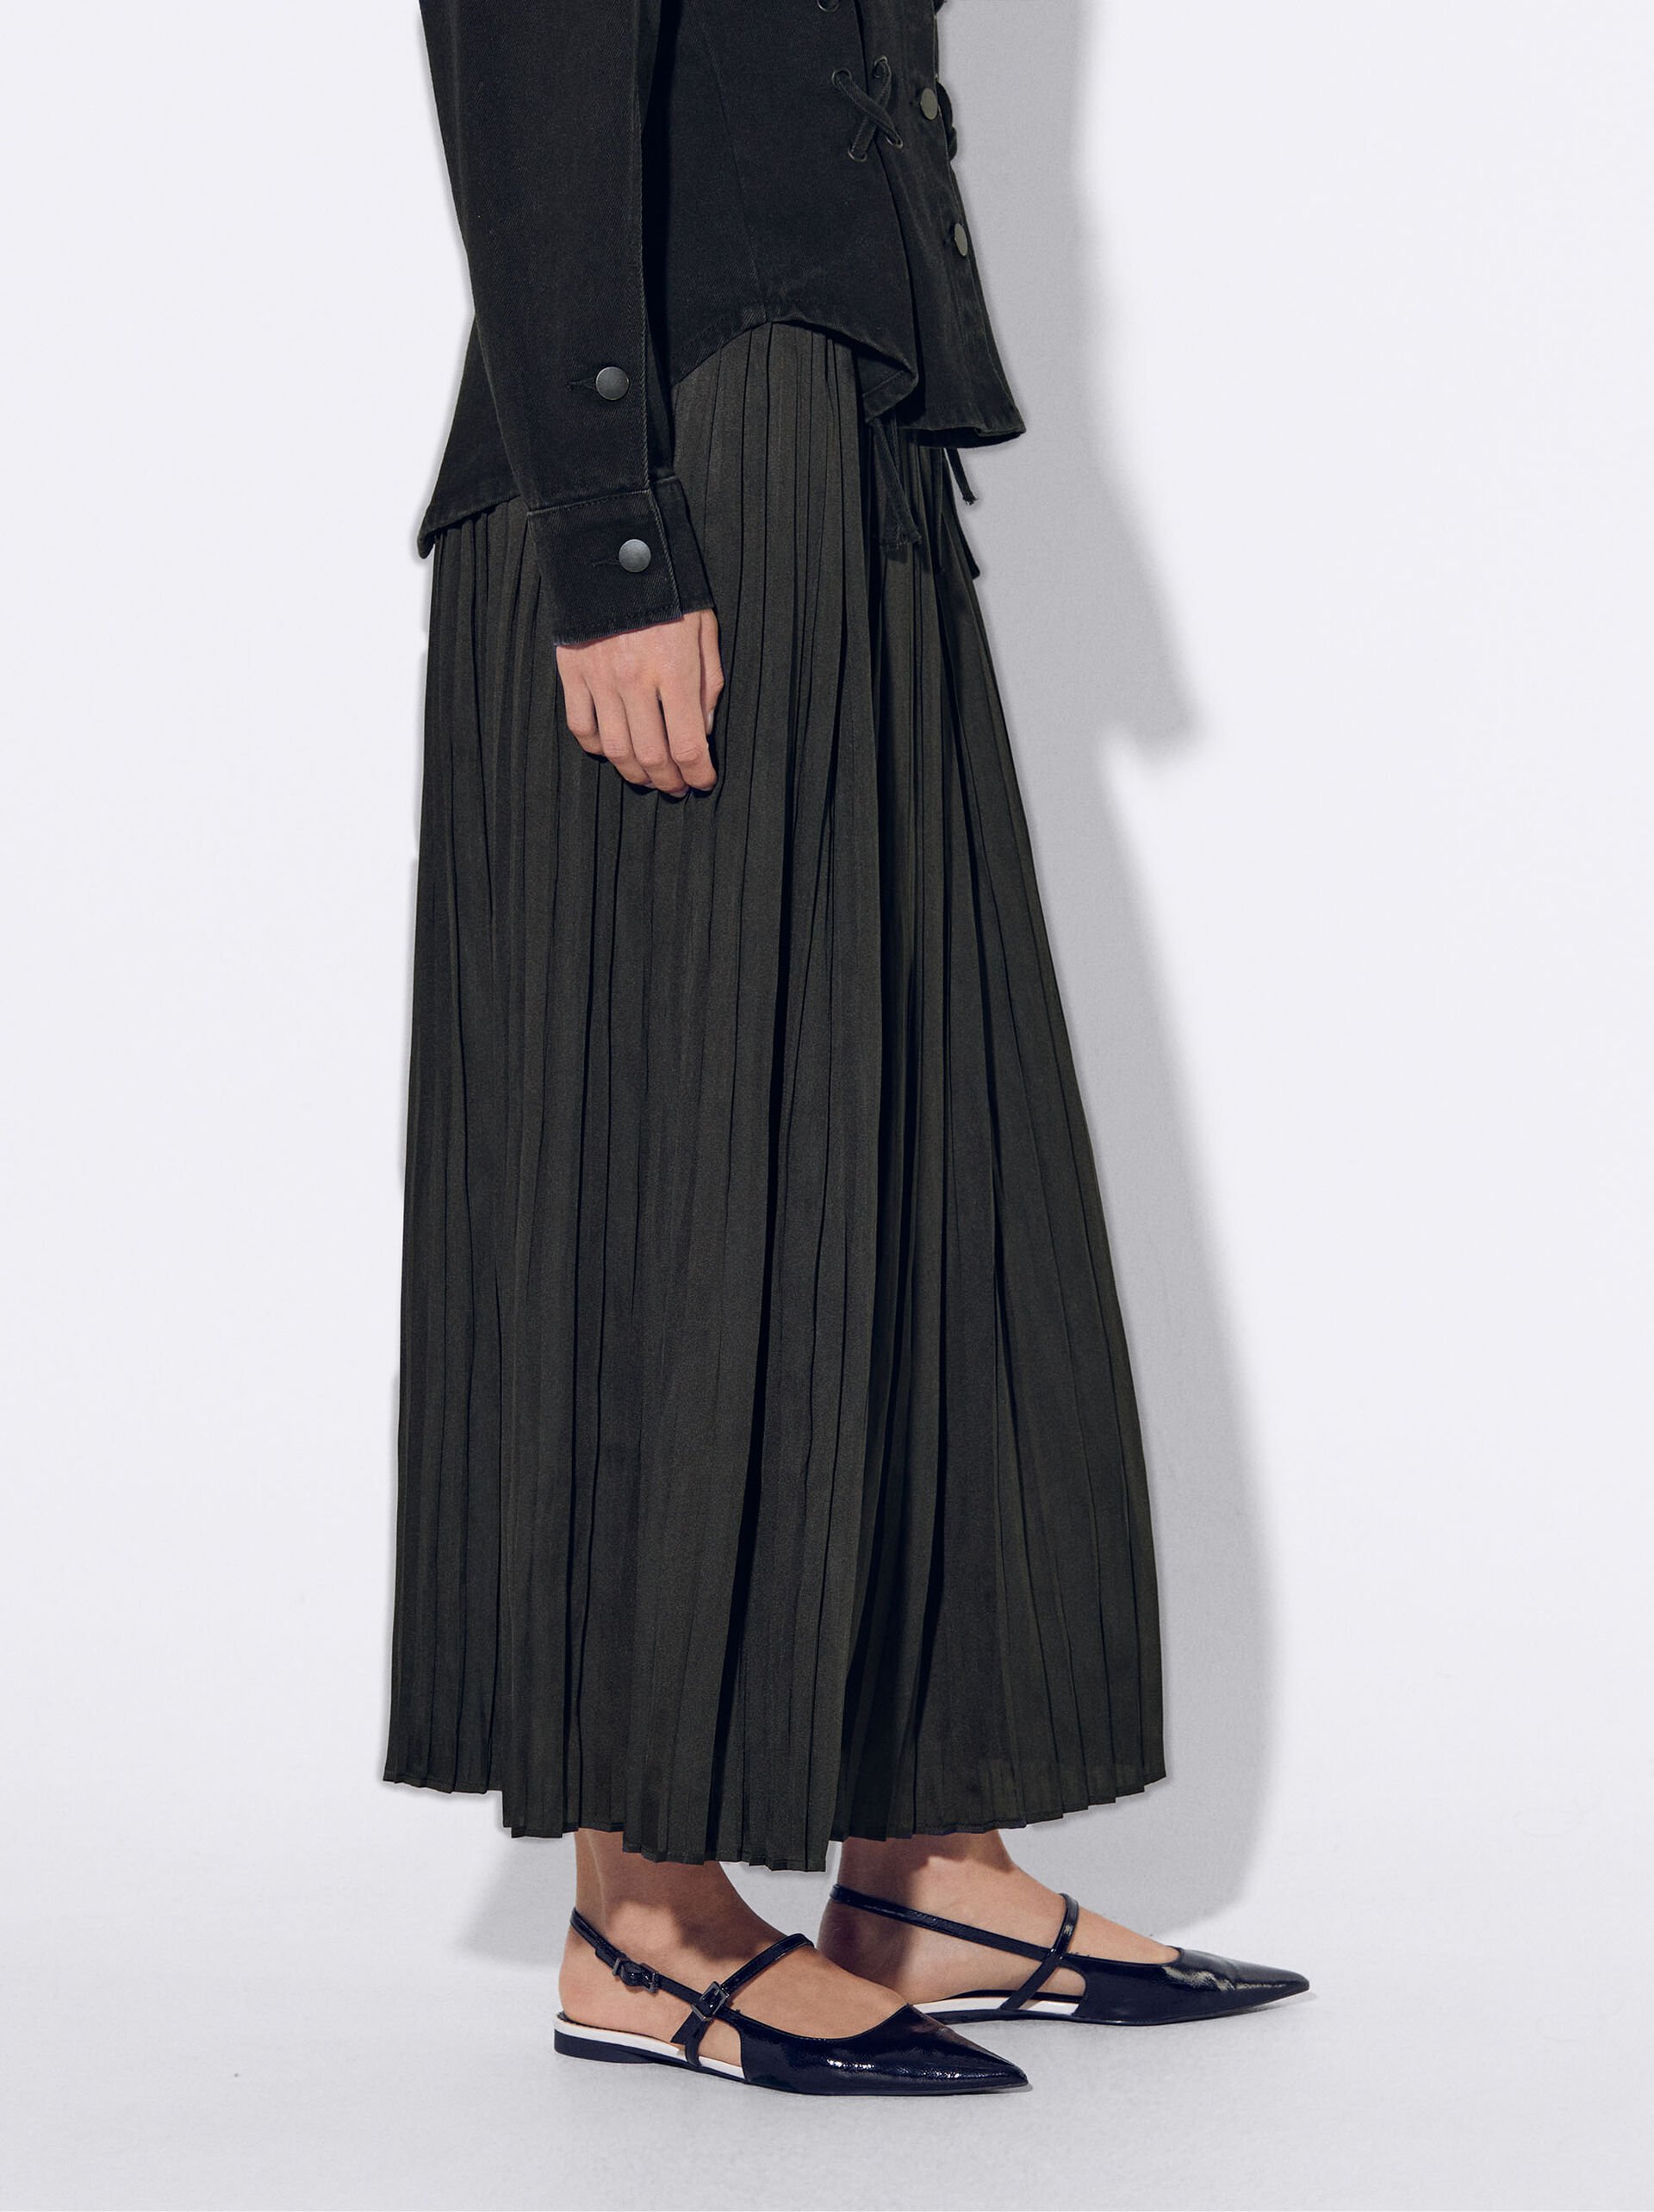 Long Pleated Skirt image number 2.0